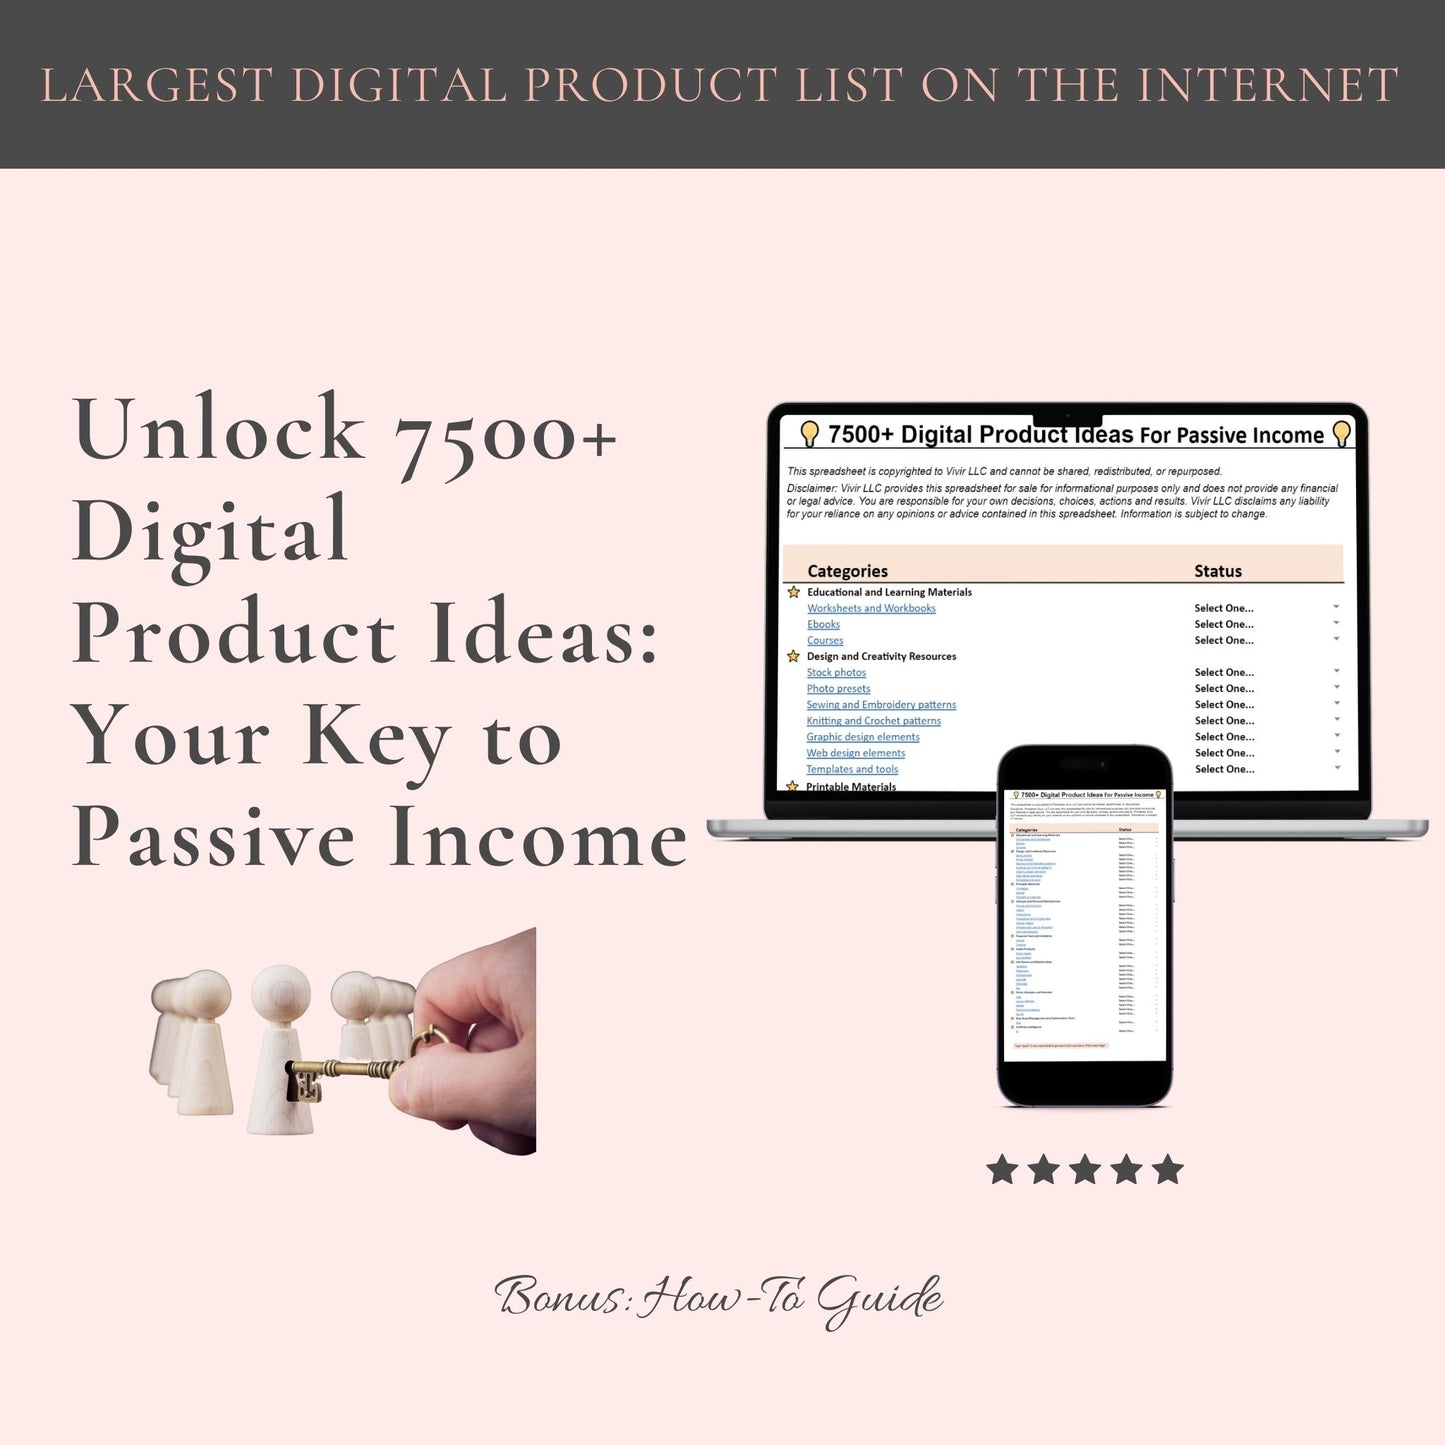 7500+ Digital Products Ideas to Sell Online for Passive Income